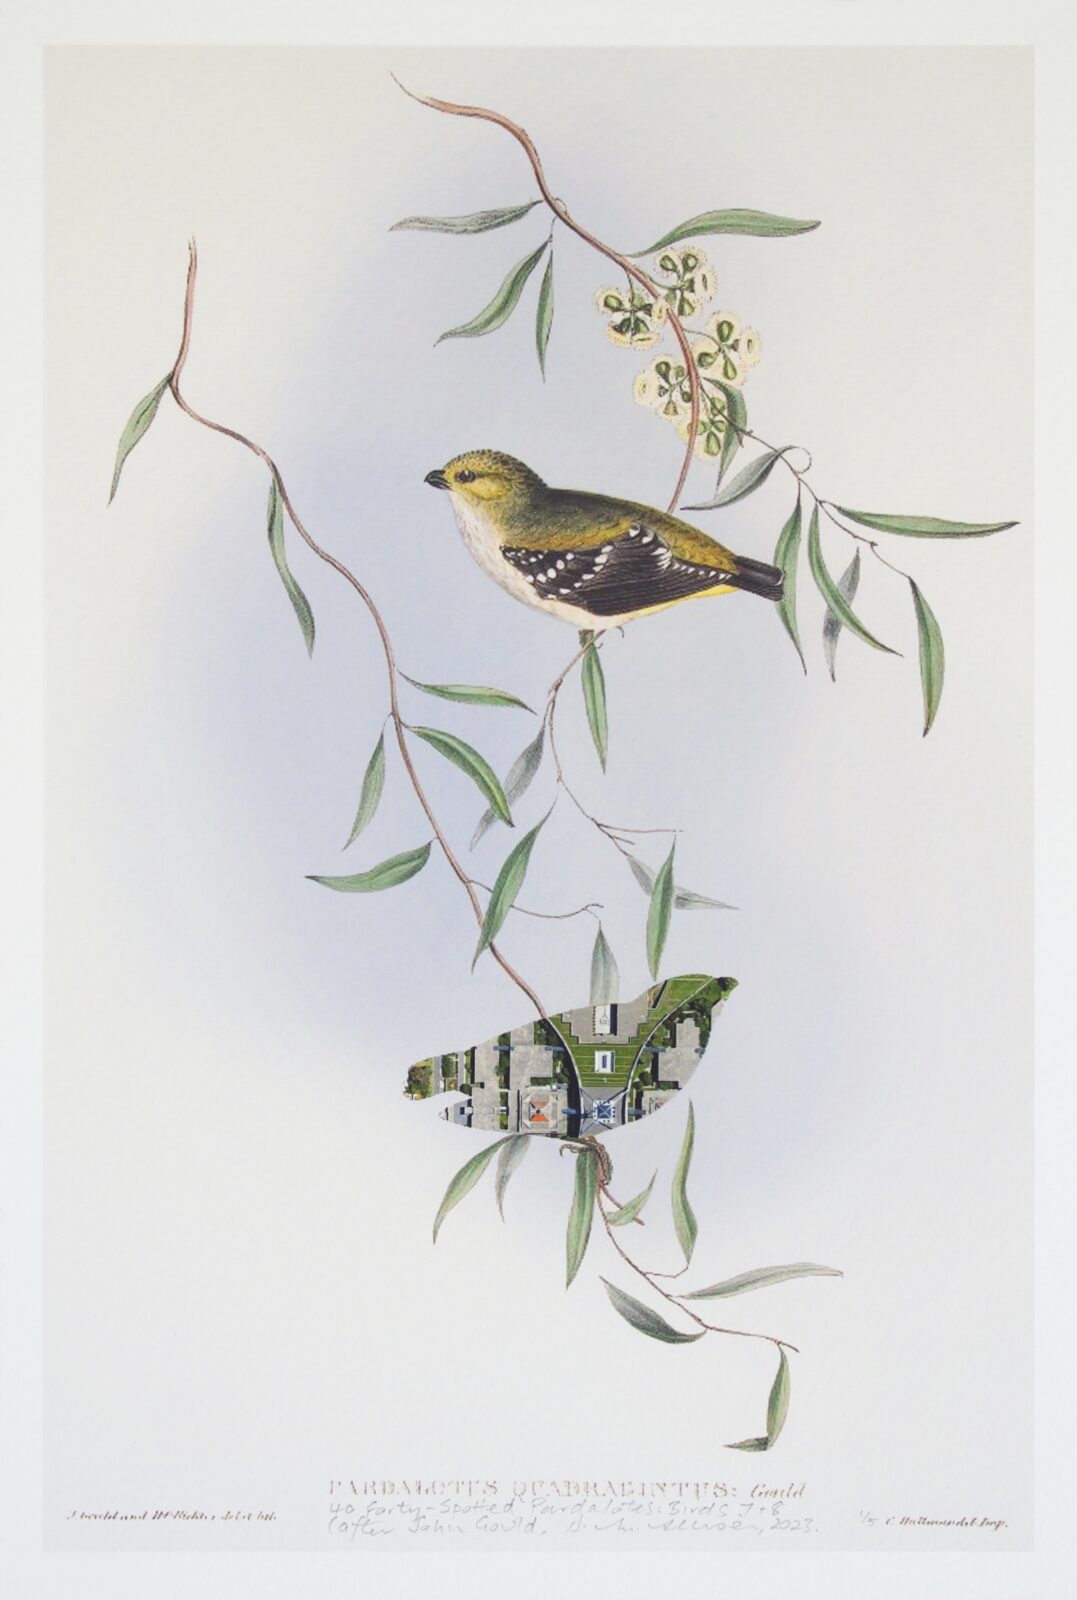 40 Forty-Spotted Pardalotes Birds 7 & 8 (after John Gould)